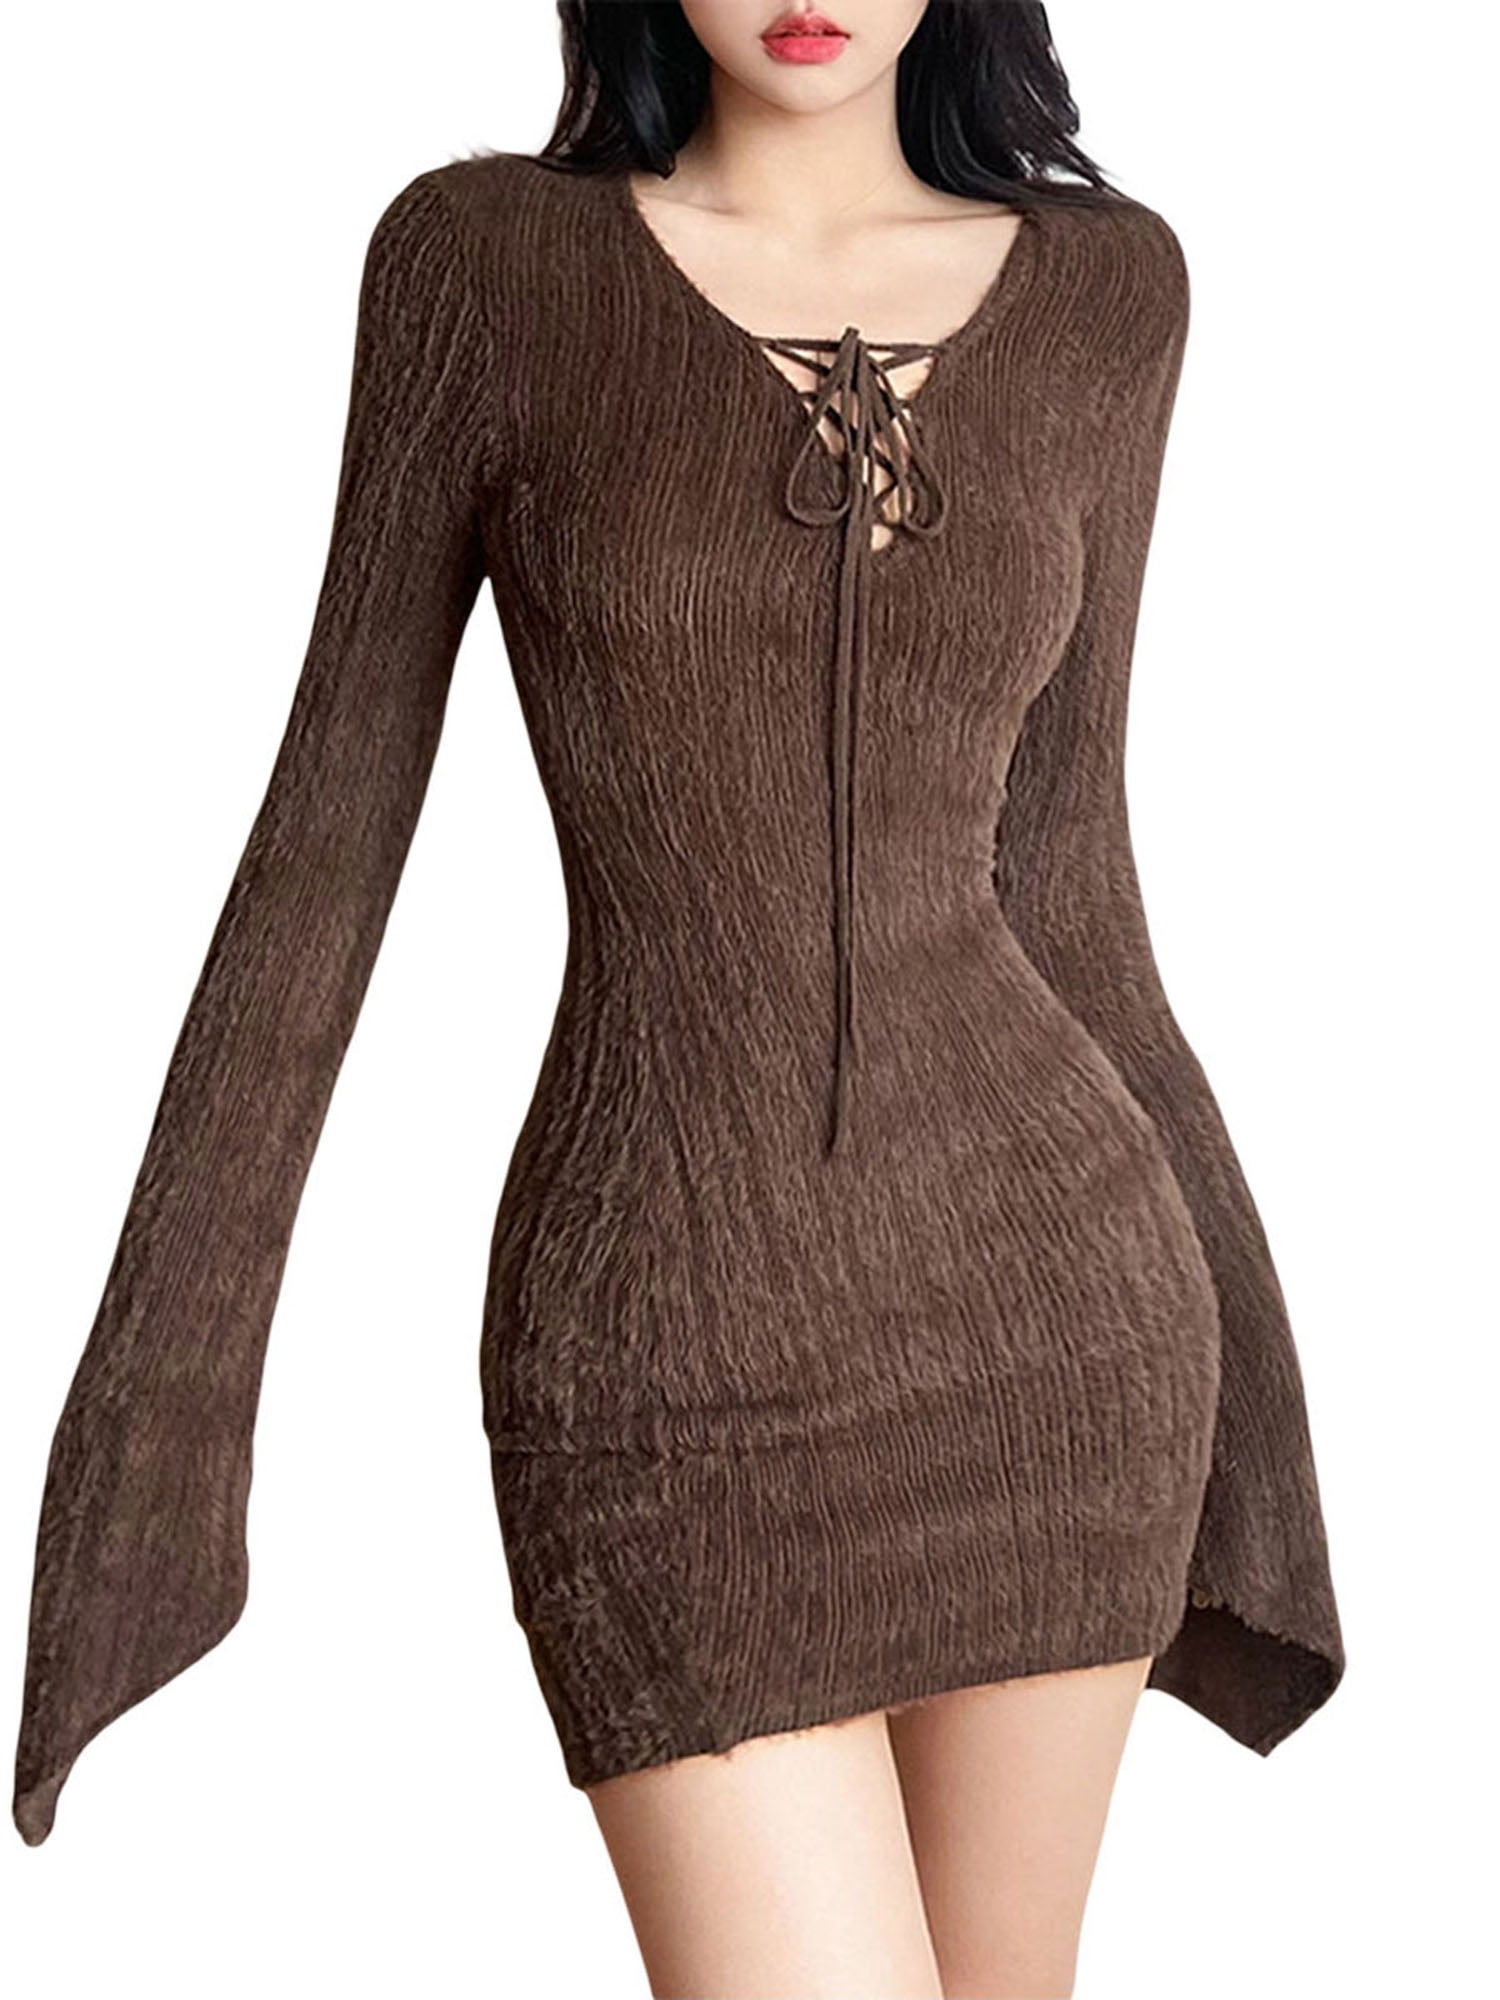 Casual Minimal Goth Chic Print Lite Bodycon Dress with Sleeves